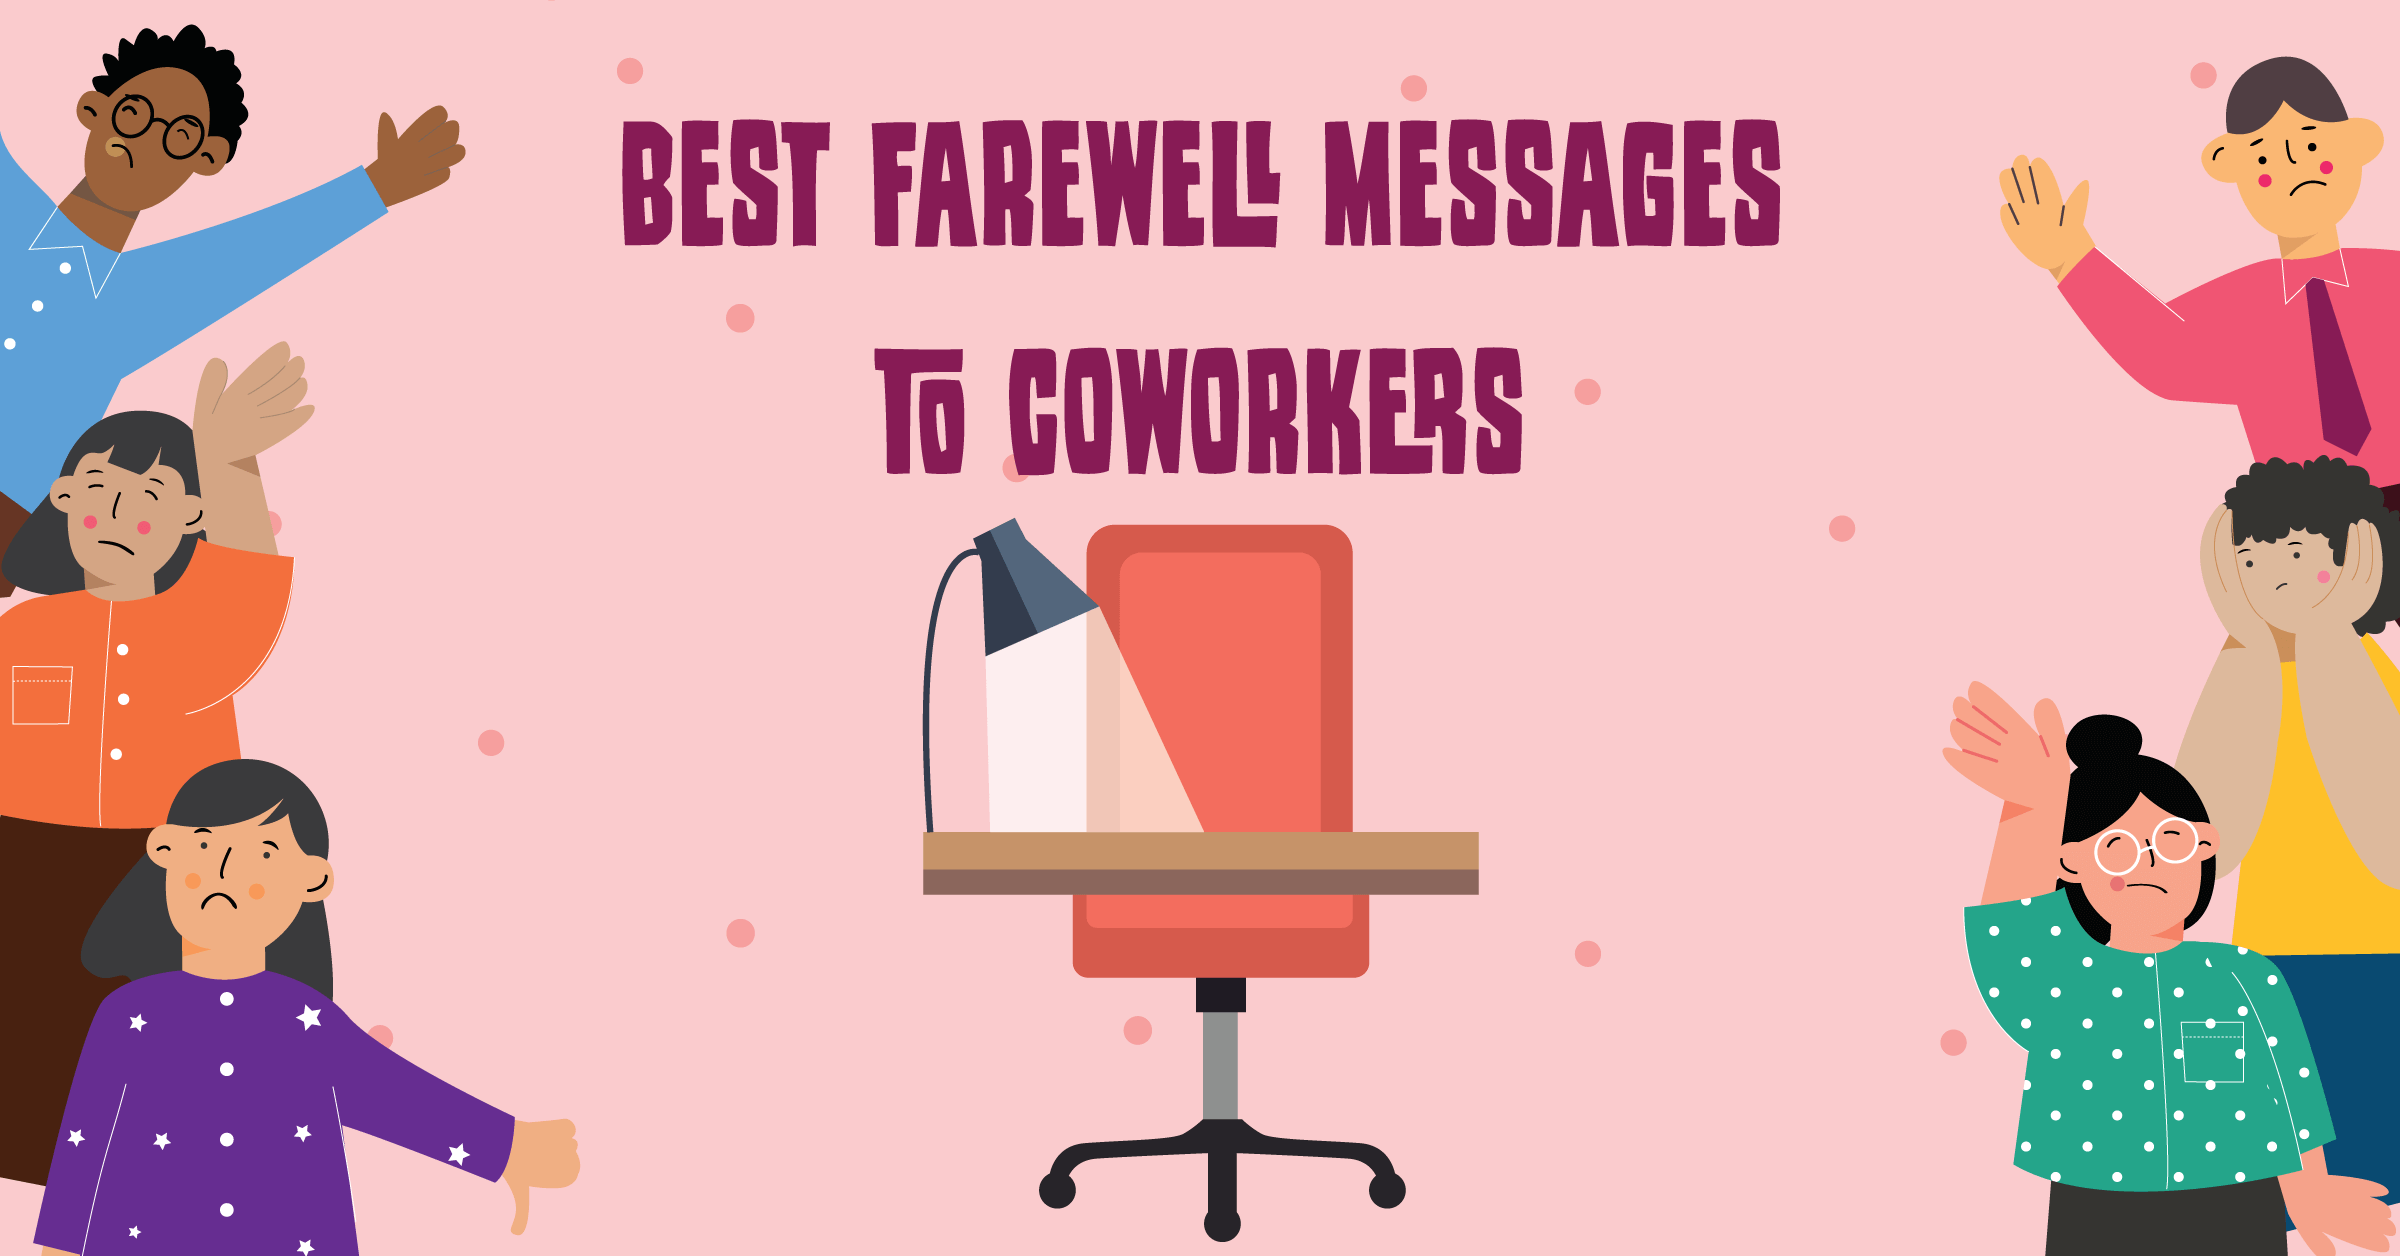 Top 50+ Heartfelt Farewell Messages For Your Employees and Co-workers